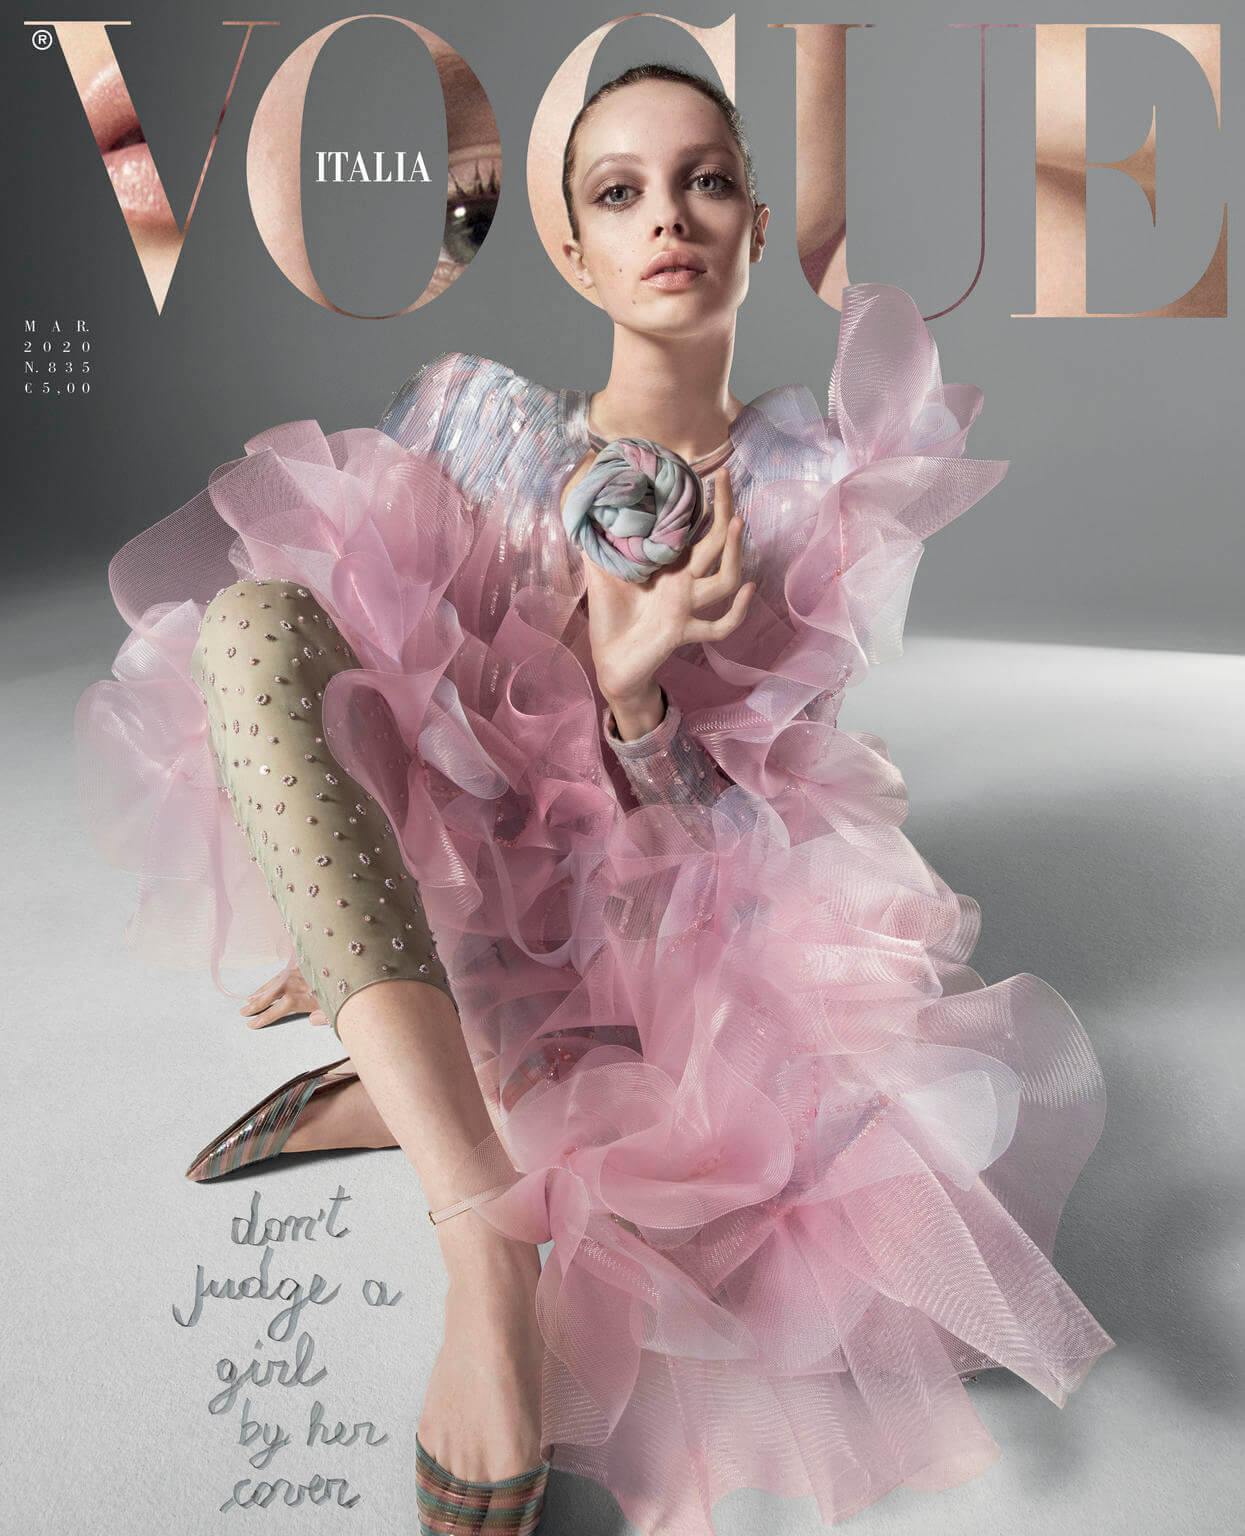 Vogue Italia March 2020 Cover Story Editorial